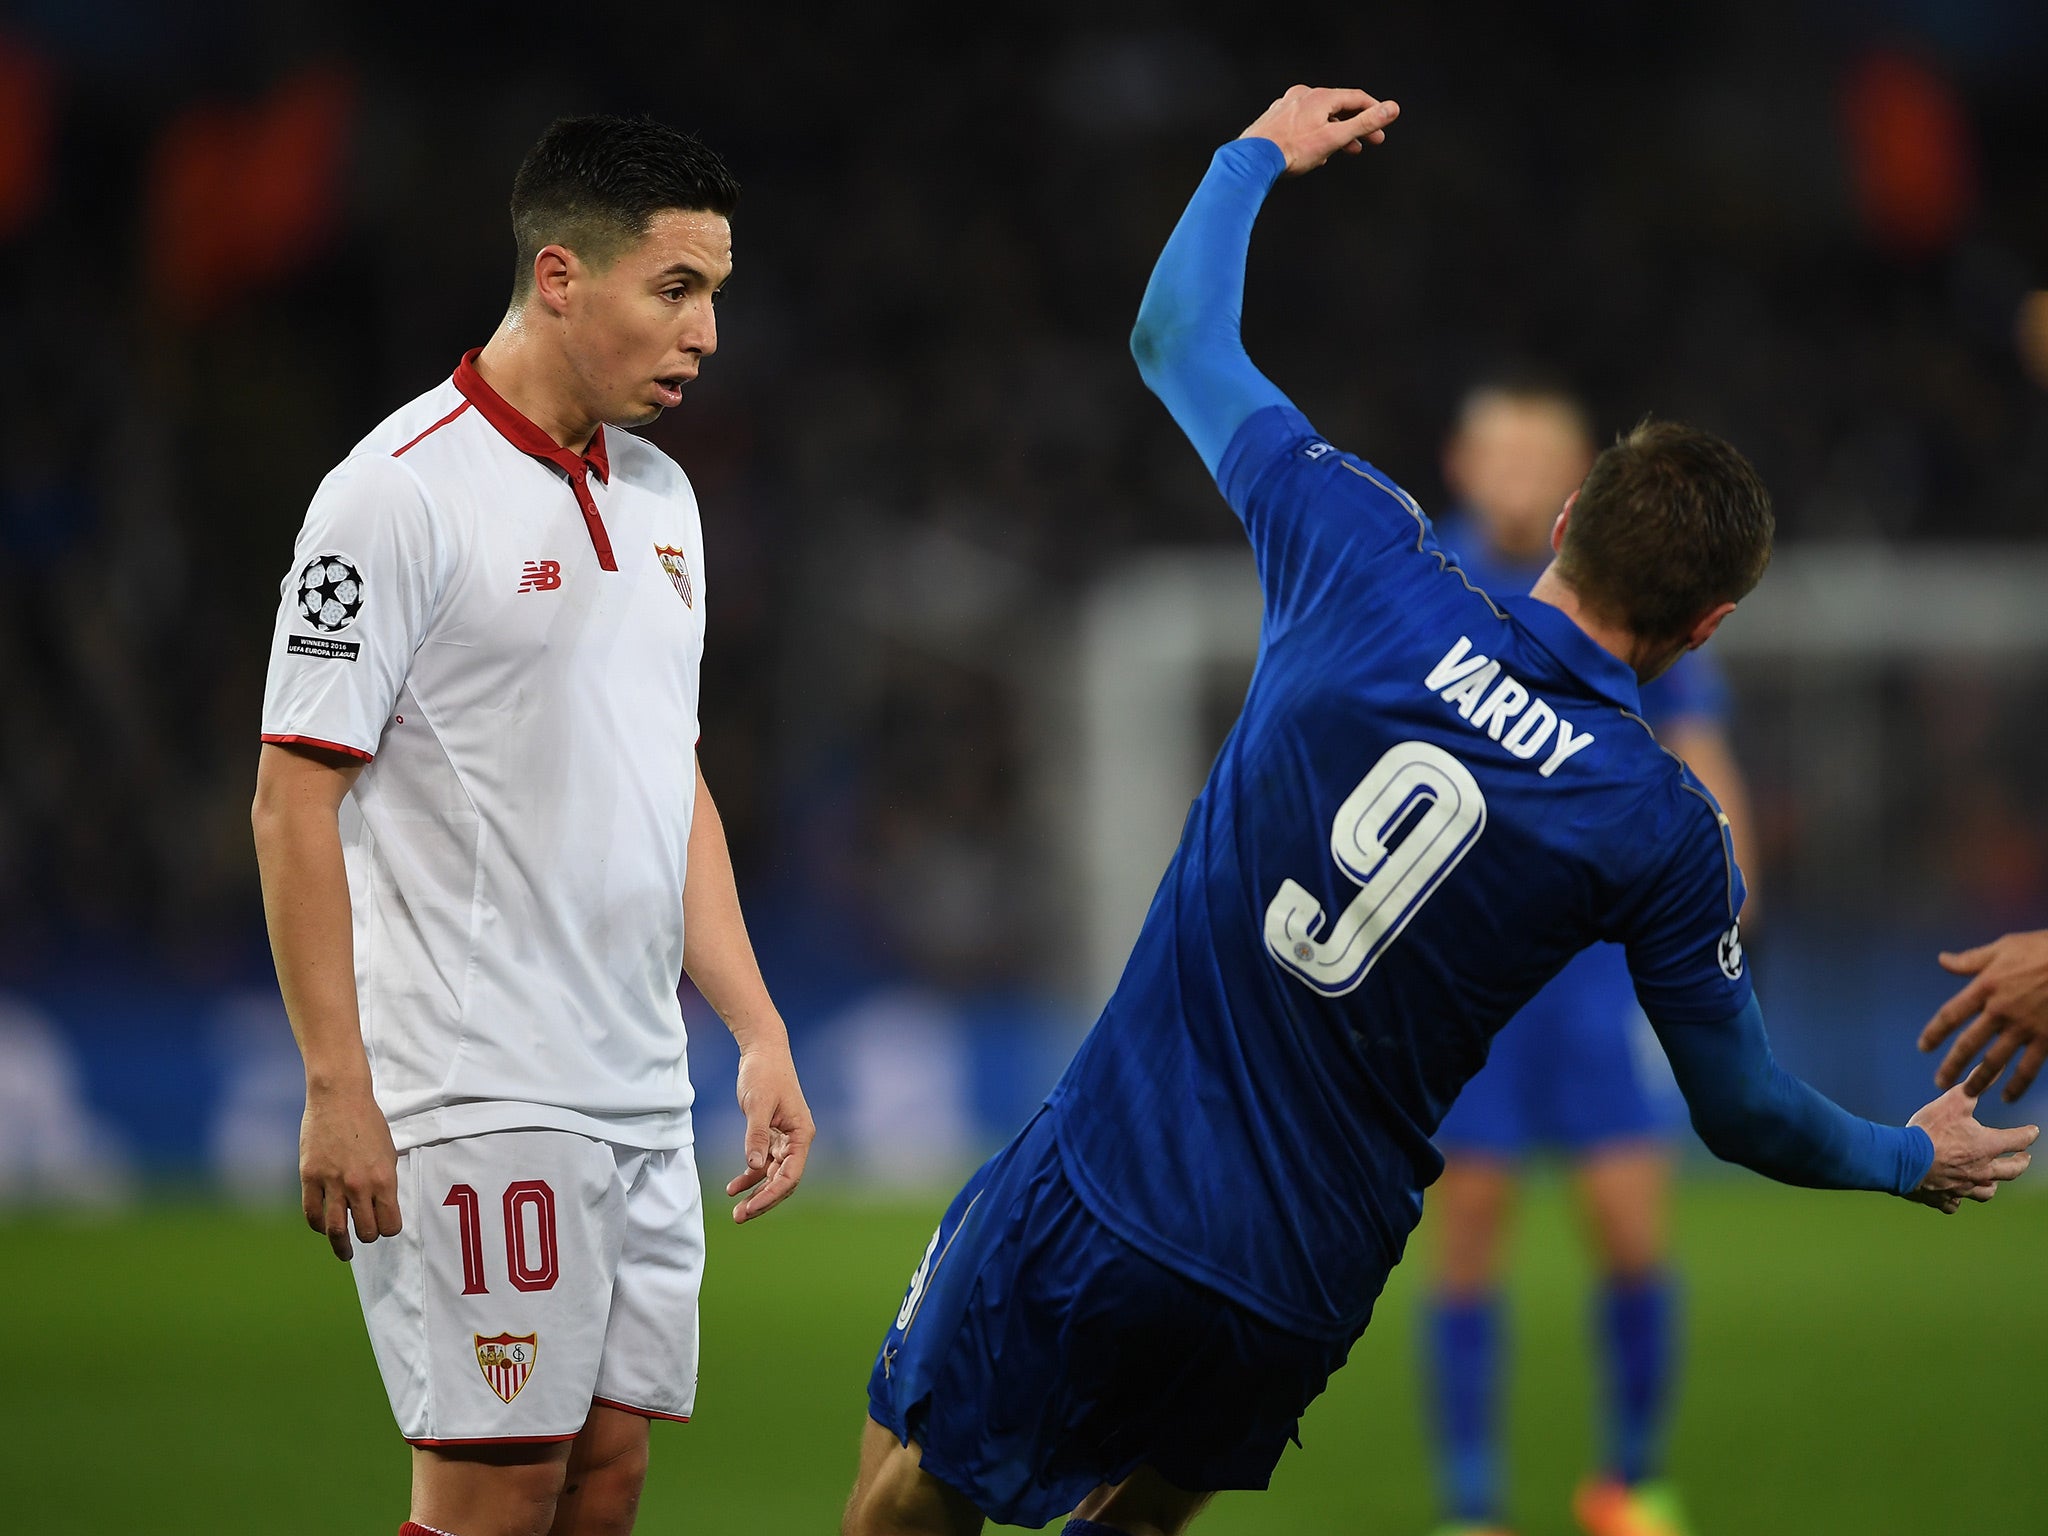 Samir Nasri was shown a red card after appearing to butt heads with Jamie Vardy